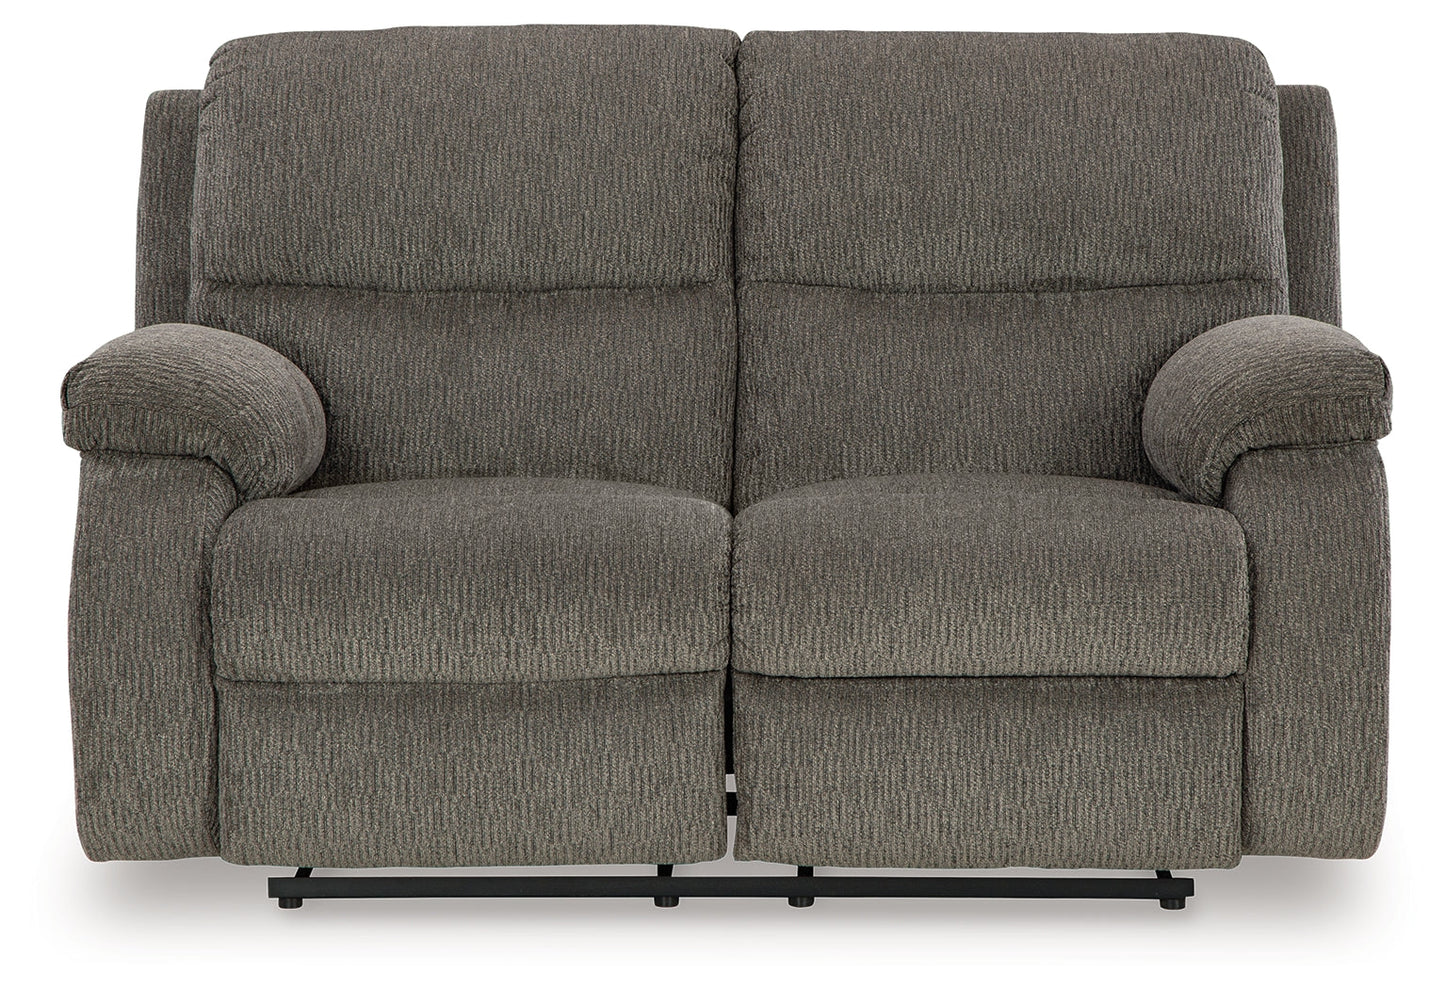 Scranto Brown Reclining Sofa, Loveseat and Recliner